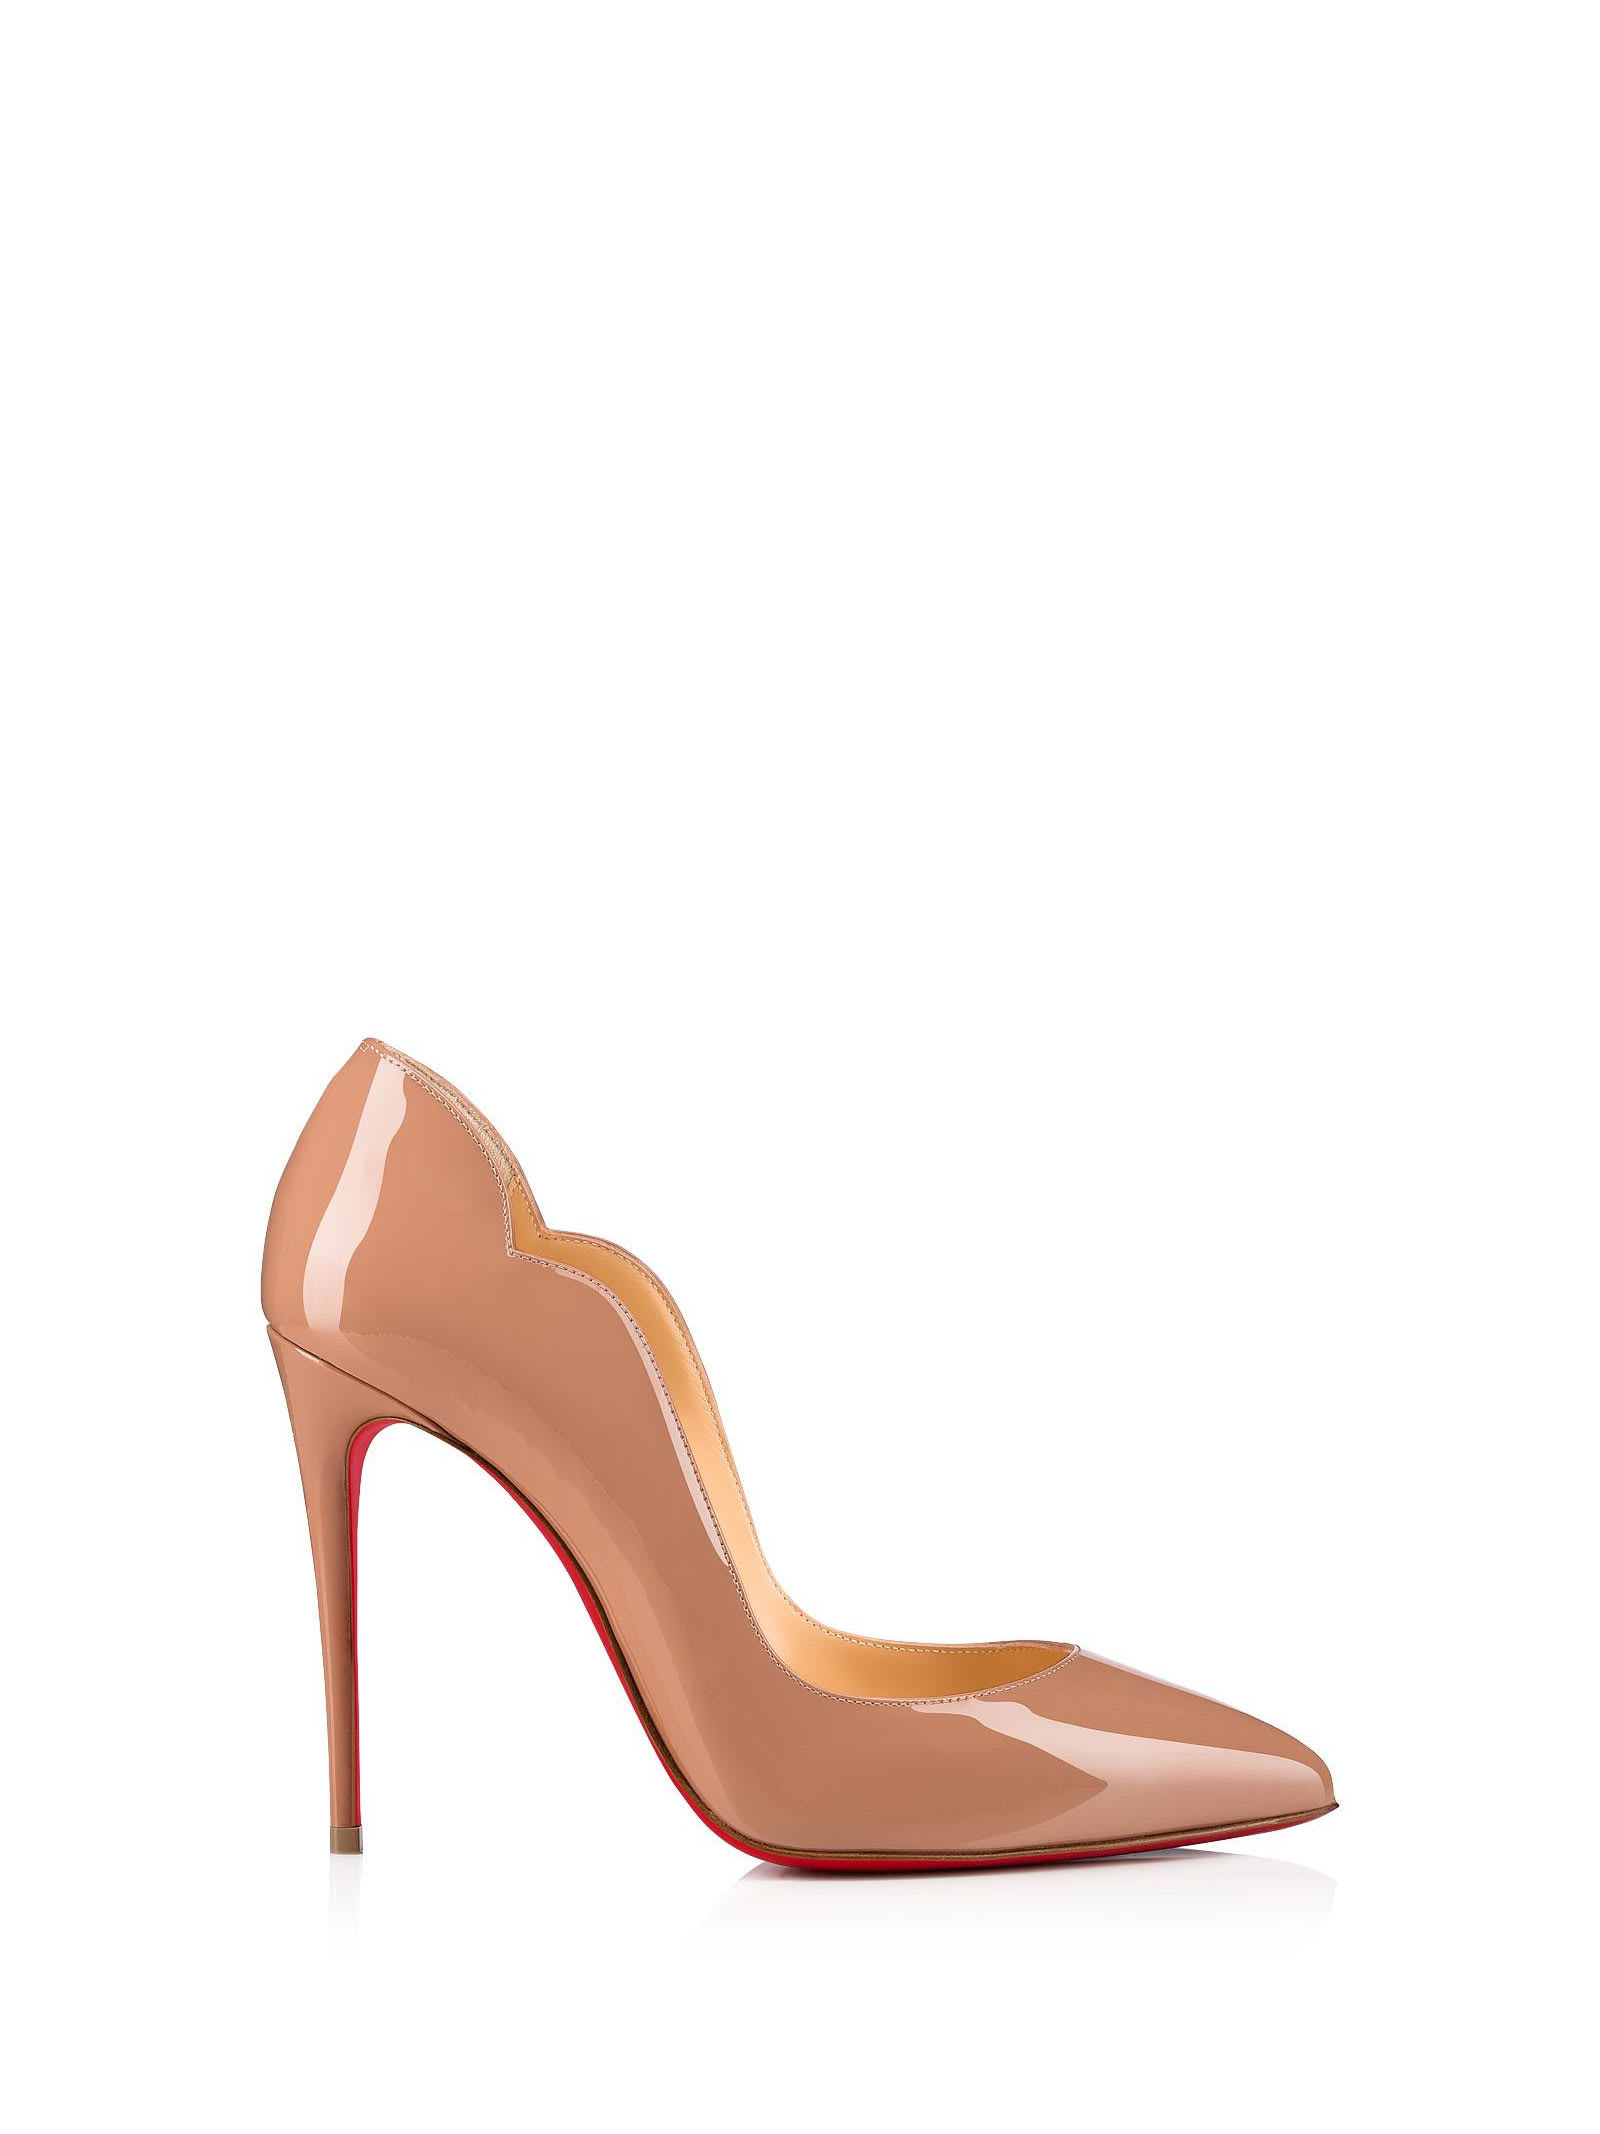 Christian Louboutin Hot Chick Pumps In Nude Patent Calf